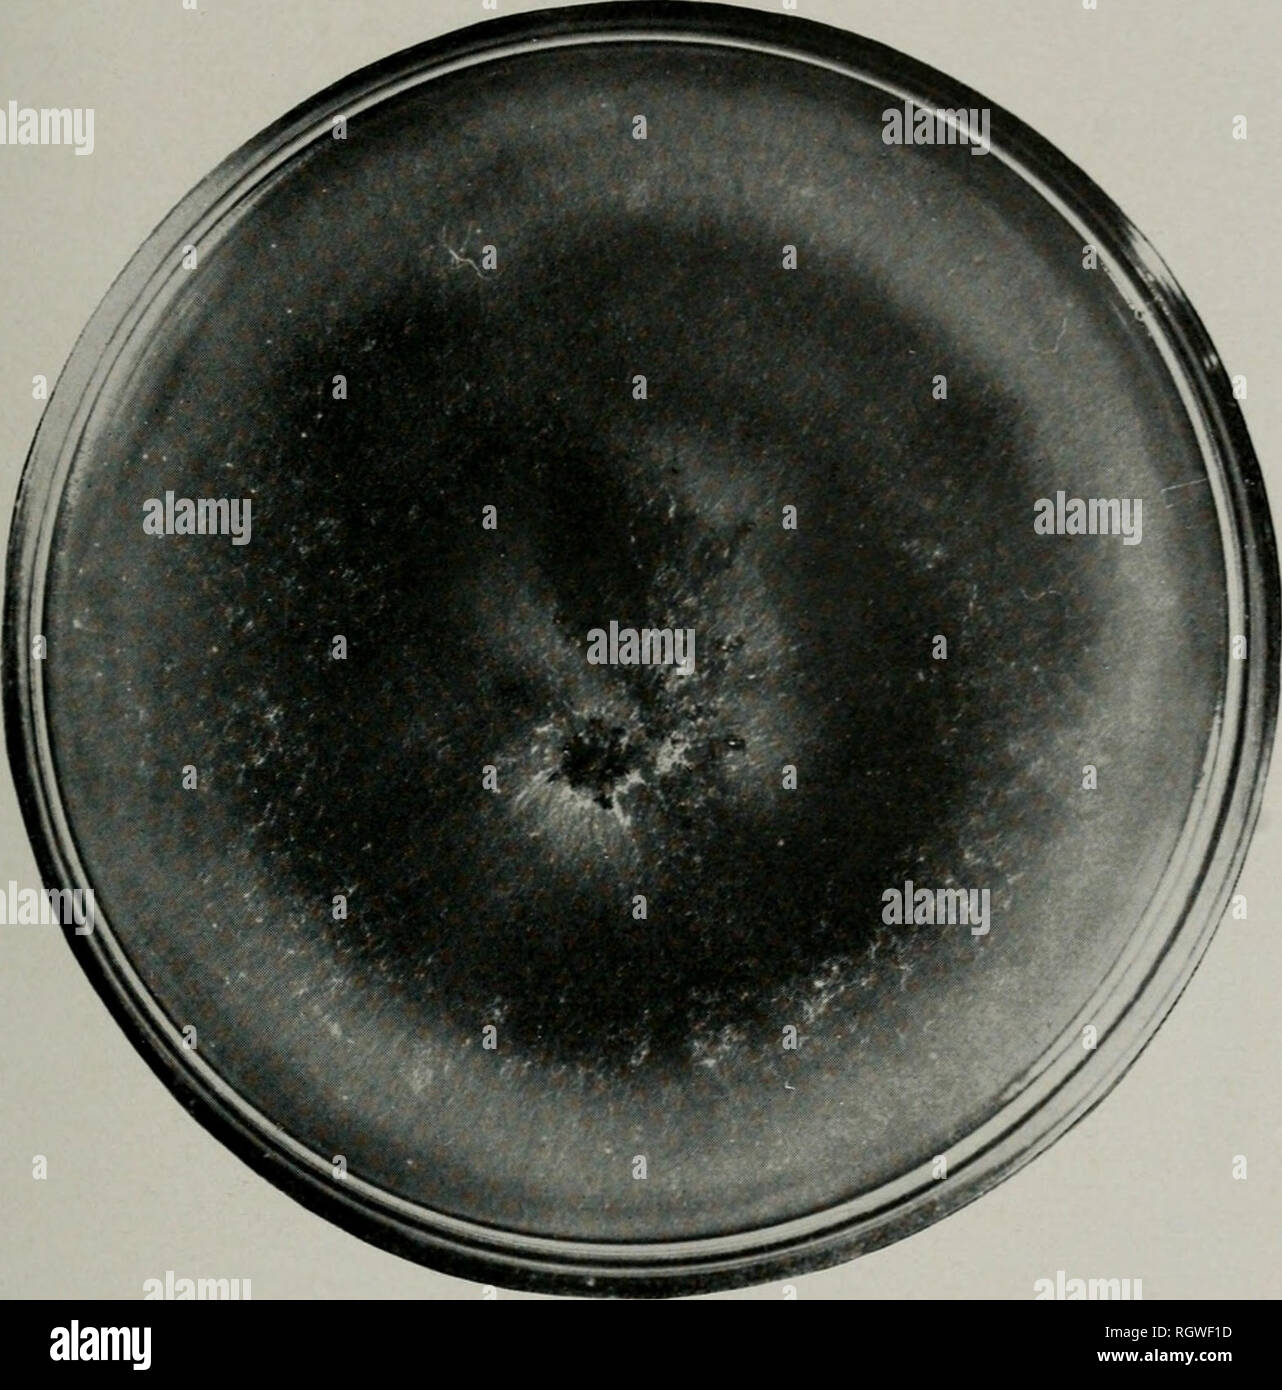 . Bulletin. Natural history; Natural history. HARRIS: INITIAL STUDIES OF ELM DISEASES 33. Fig. 18.—Petri-dish culture of Coniothyrium A. showing the appearance of the fungus 21 days after plating upon corn meal agar. Compare with Fig. 19. had appeared two days before the photograph was made. Tliree of the wood sHces remained sterile (corrosive subhmate was used in sterilizing them) and yielded no fungous growths. The discolored areas in the medium about the wood slices are due to an outward diffusion and subsequent oxidation of tannins. Other substances may be present also. Within four or live Stock Photo